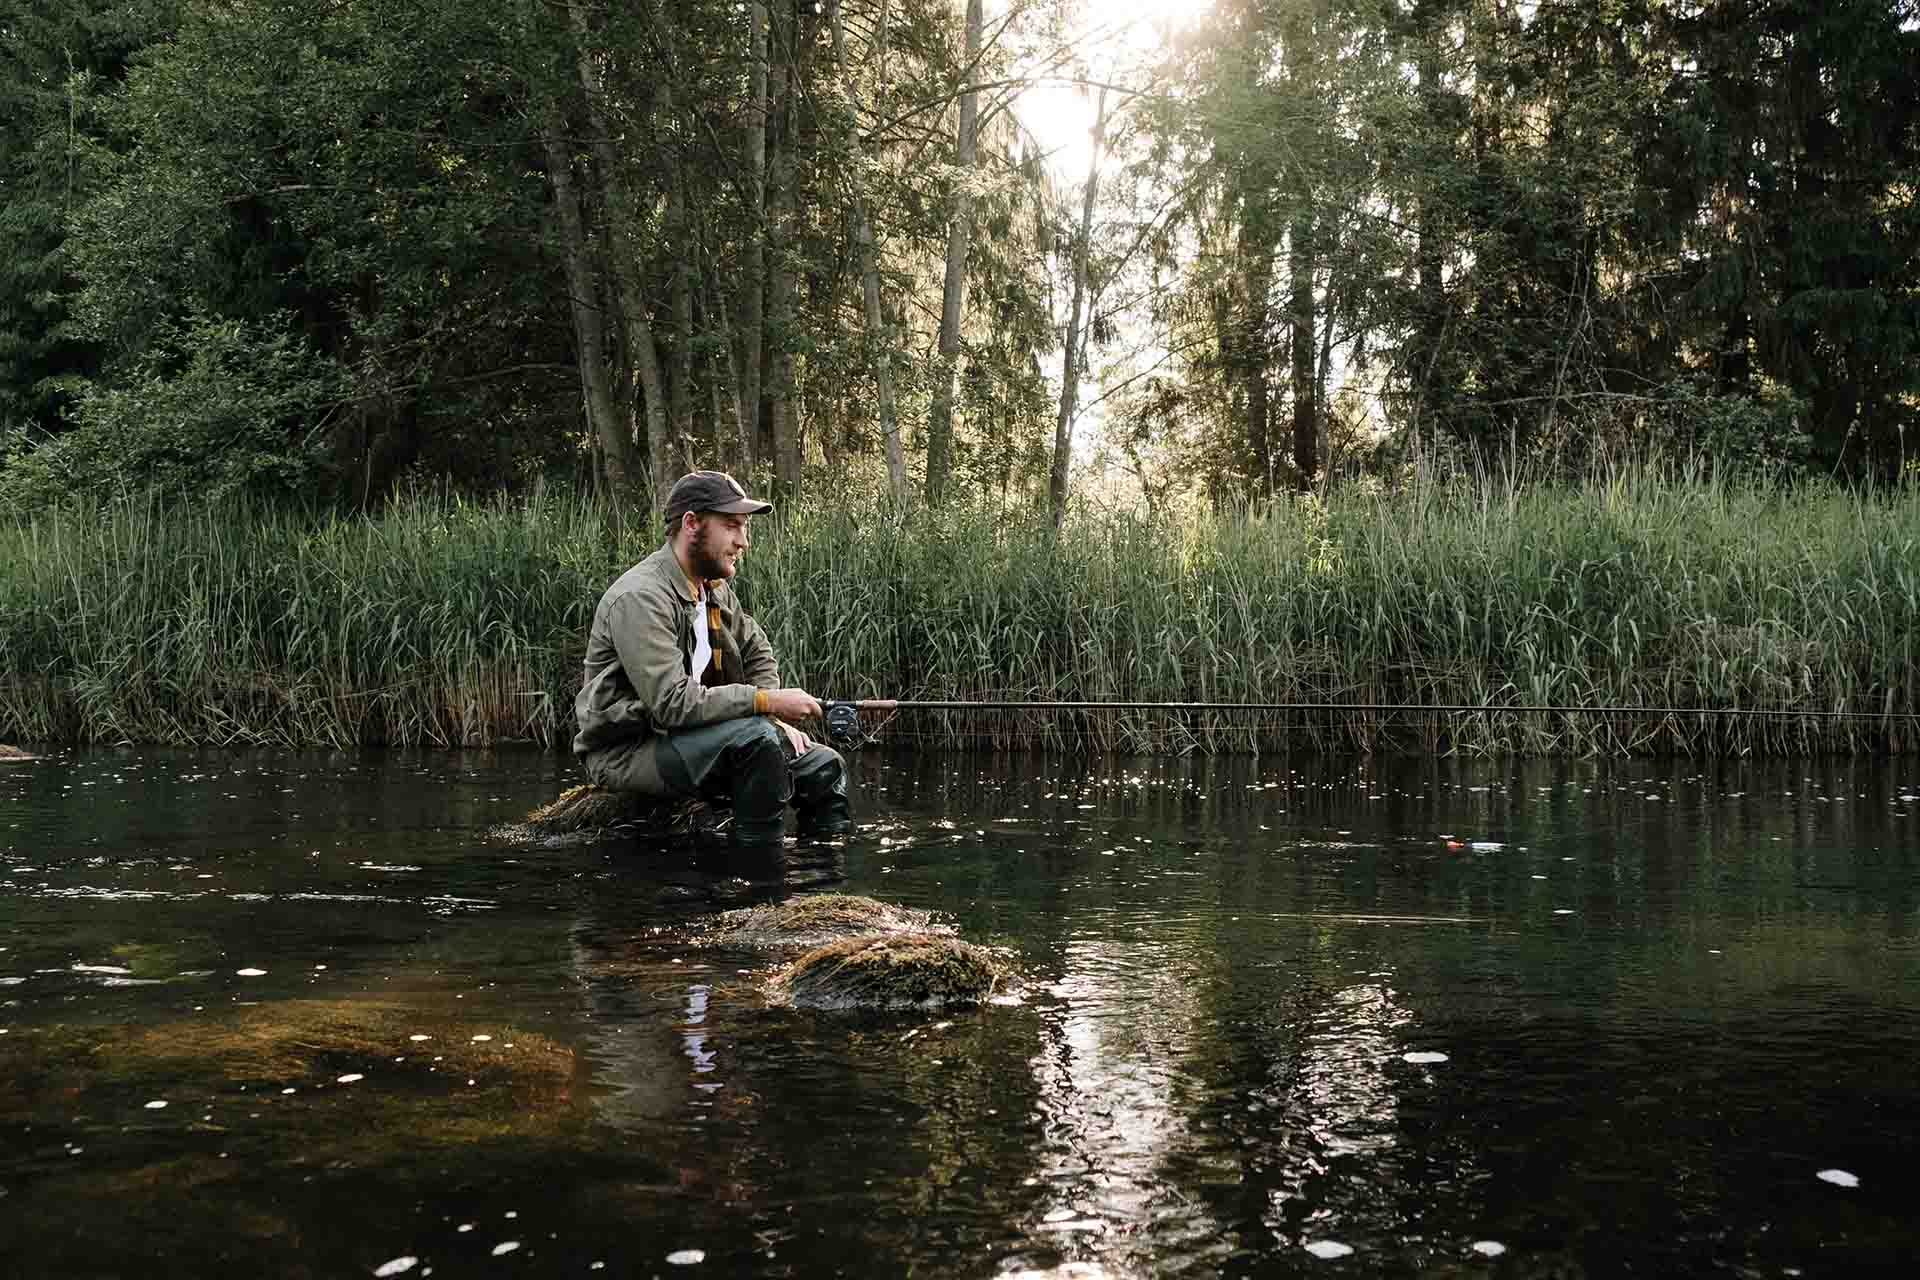 A man sitting in a stream while fishing